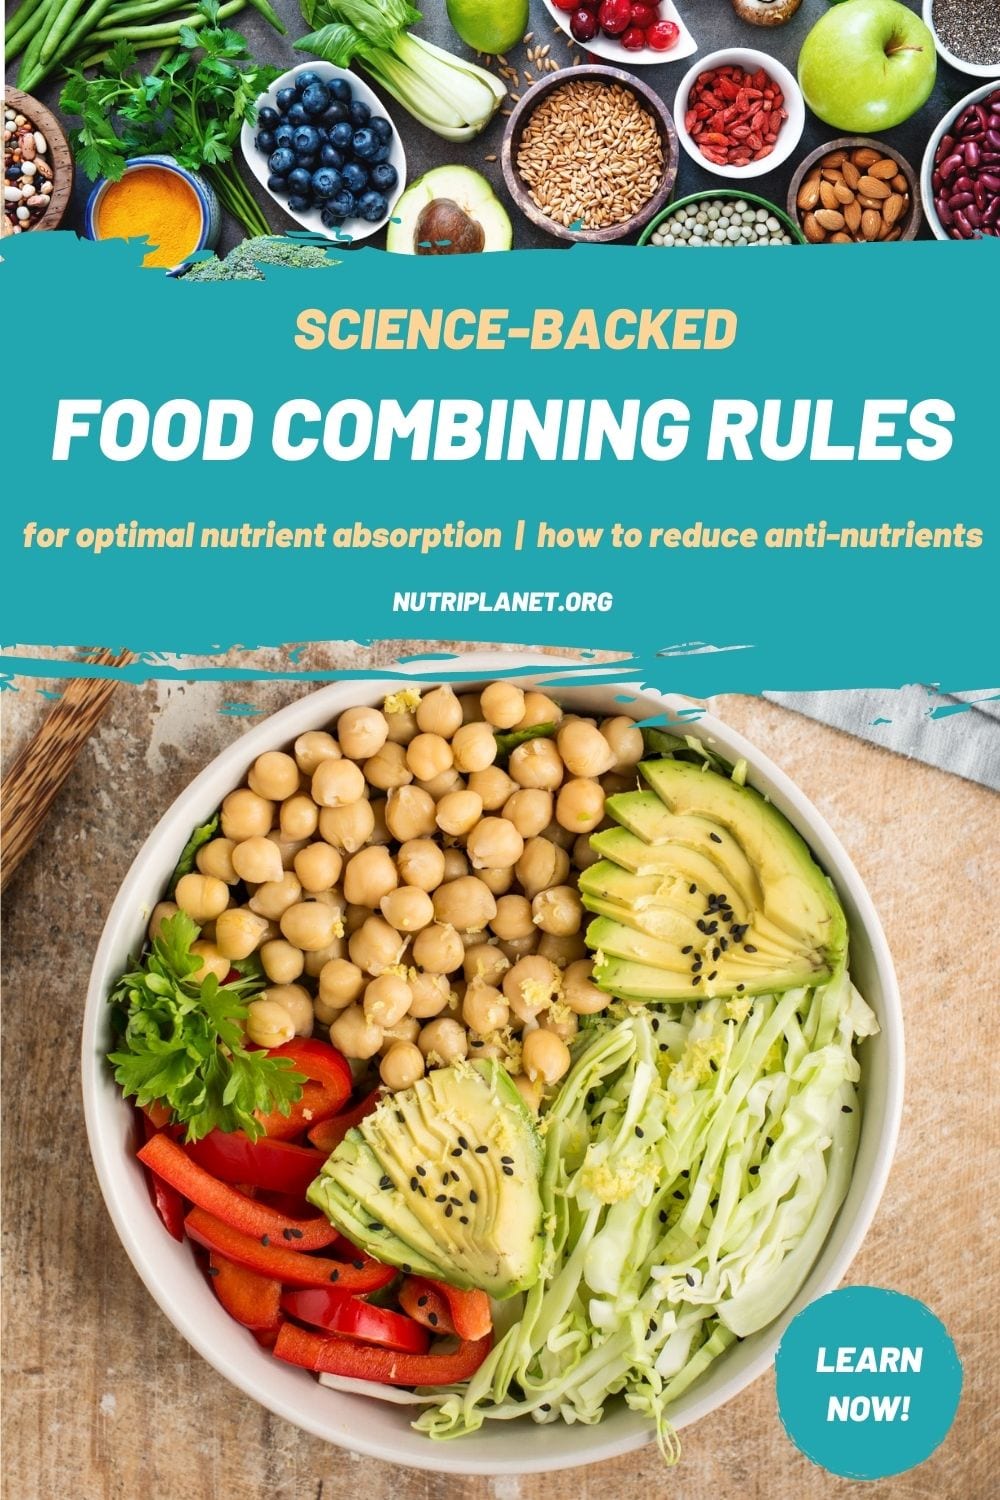 Learn food combining rules that are backed by science to enhance nutrient absorption and degrade the effect of anti-nutrients.